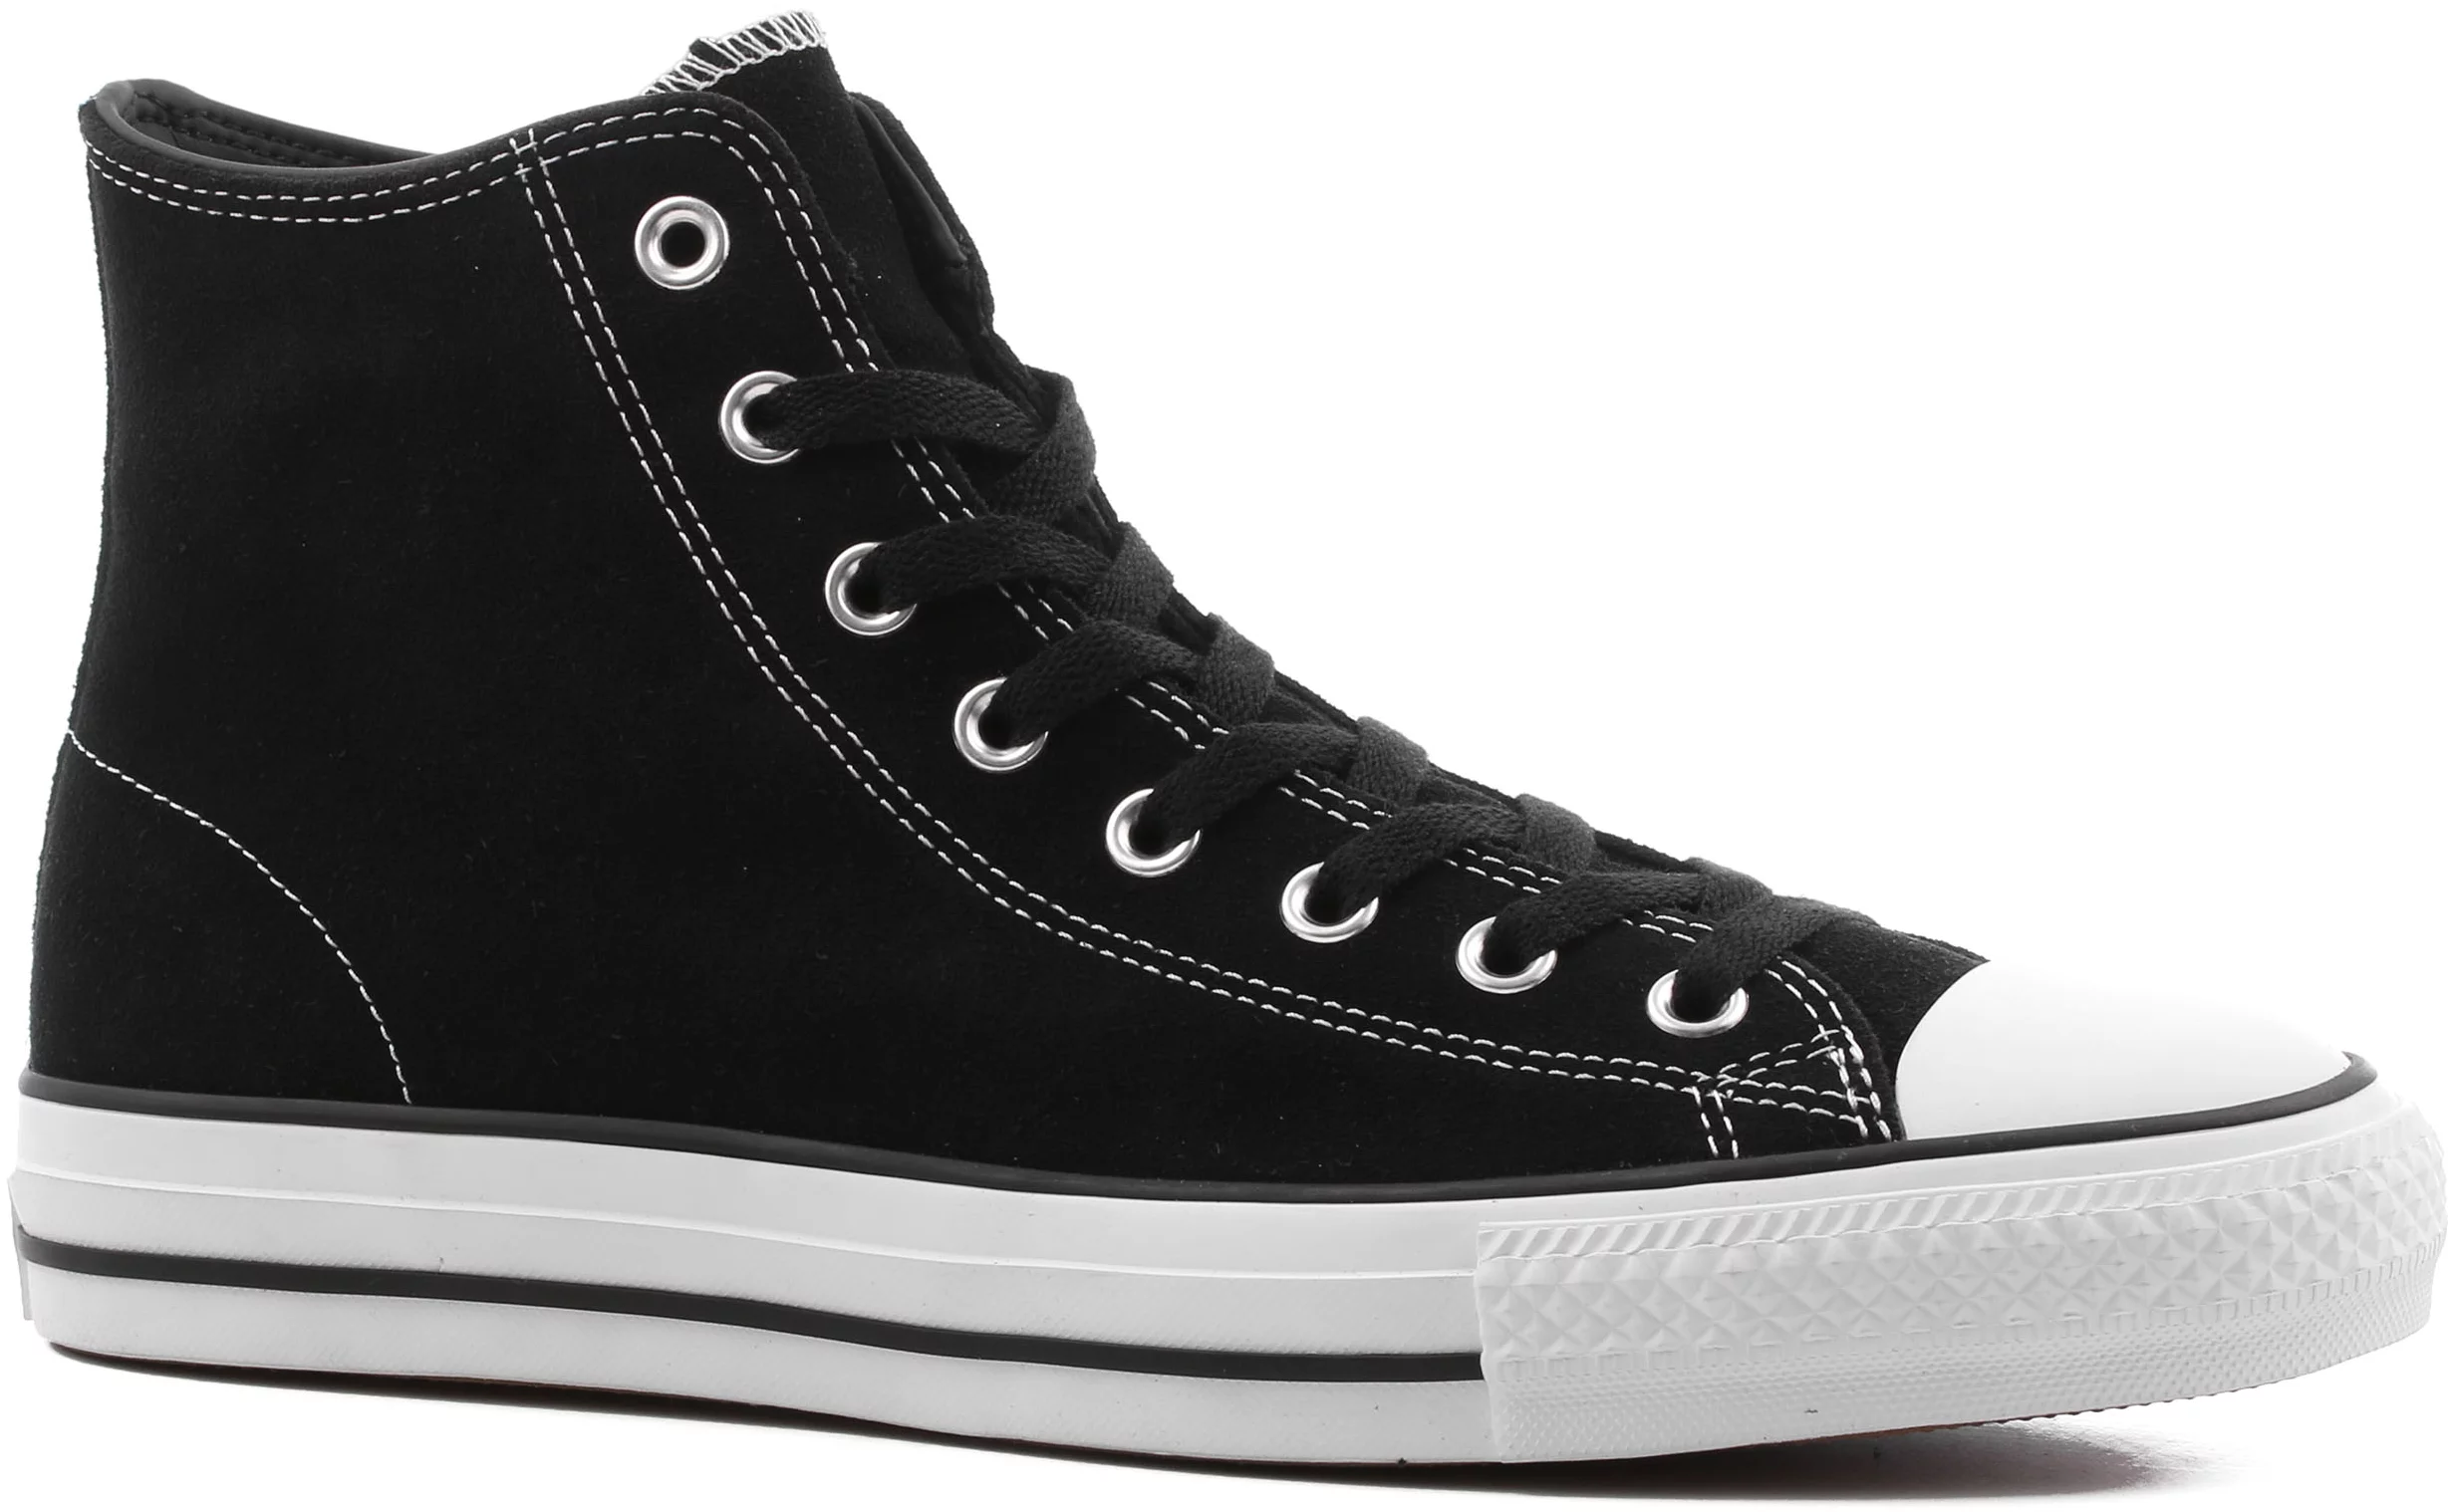 Chuck Taylor All Star Pro High Skate Shoes (suede) black/black/white - Free Shipping Tactics